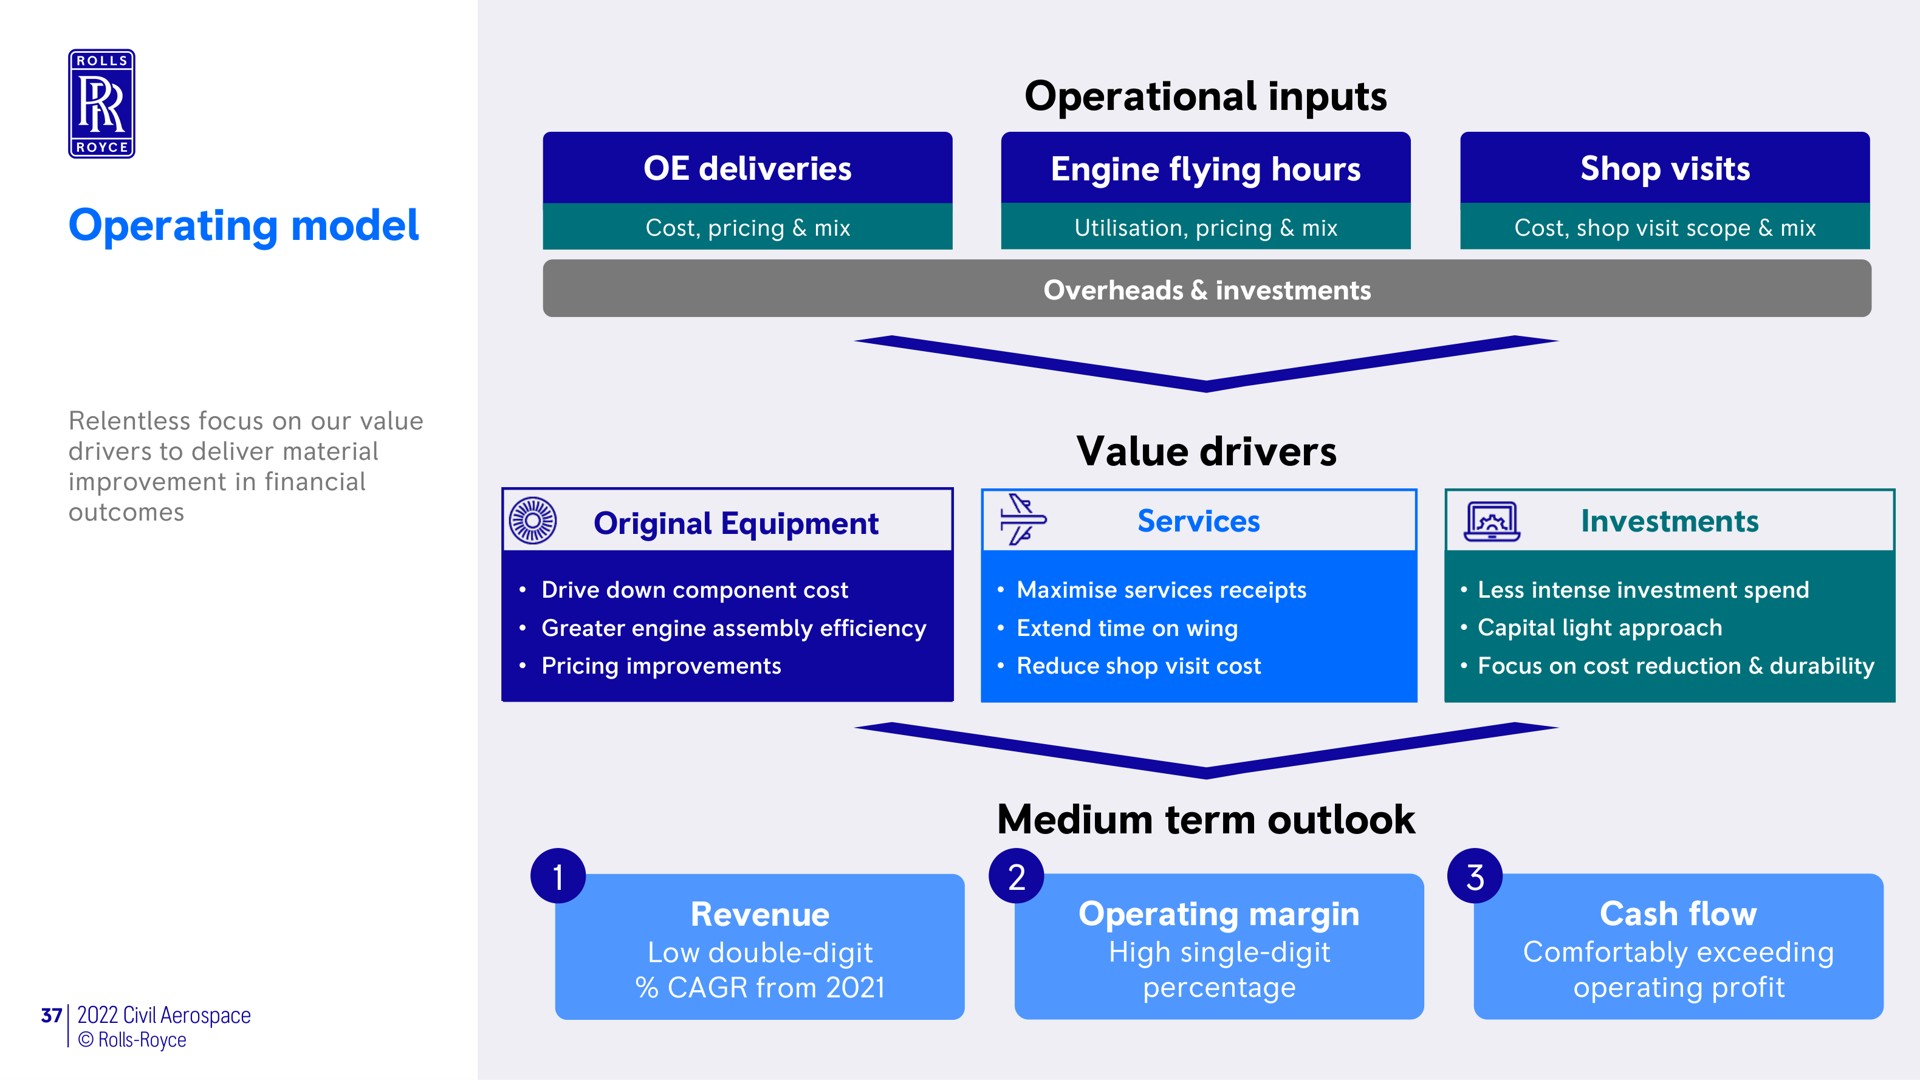 operating model deliveries engine flying hours shop visits operational inputs value drivers revenue medium term outlook operating margin cash flow | Rolls-Royce Holdings